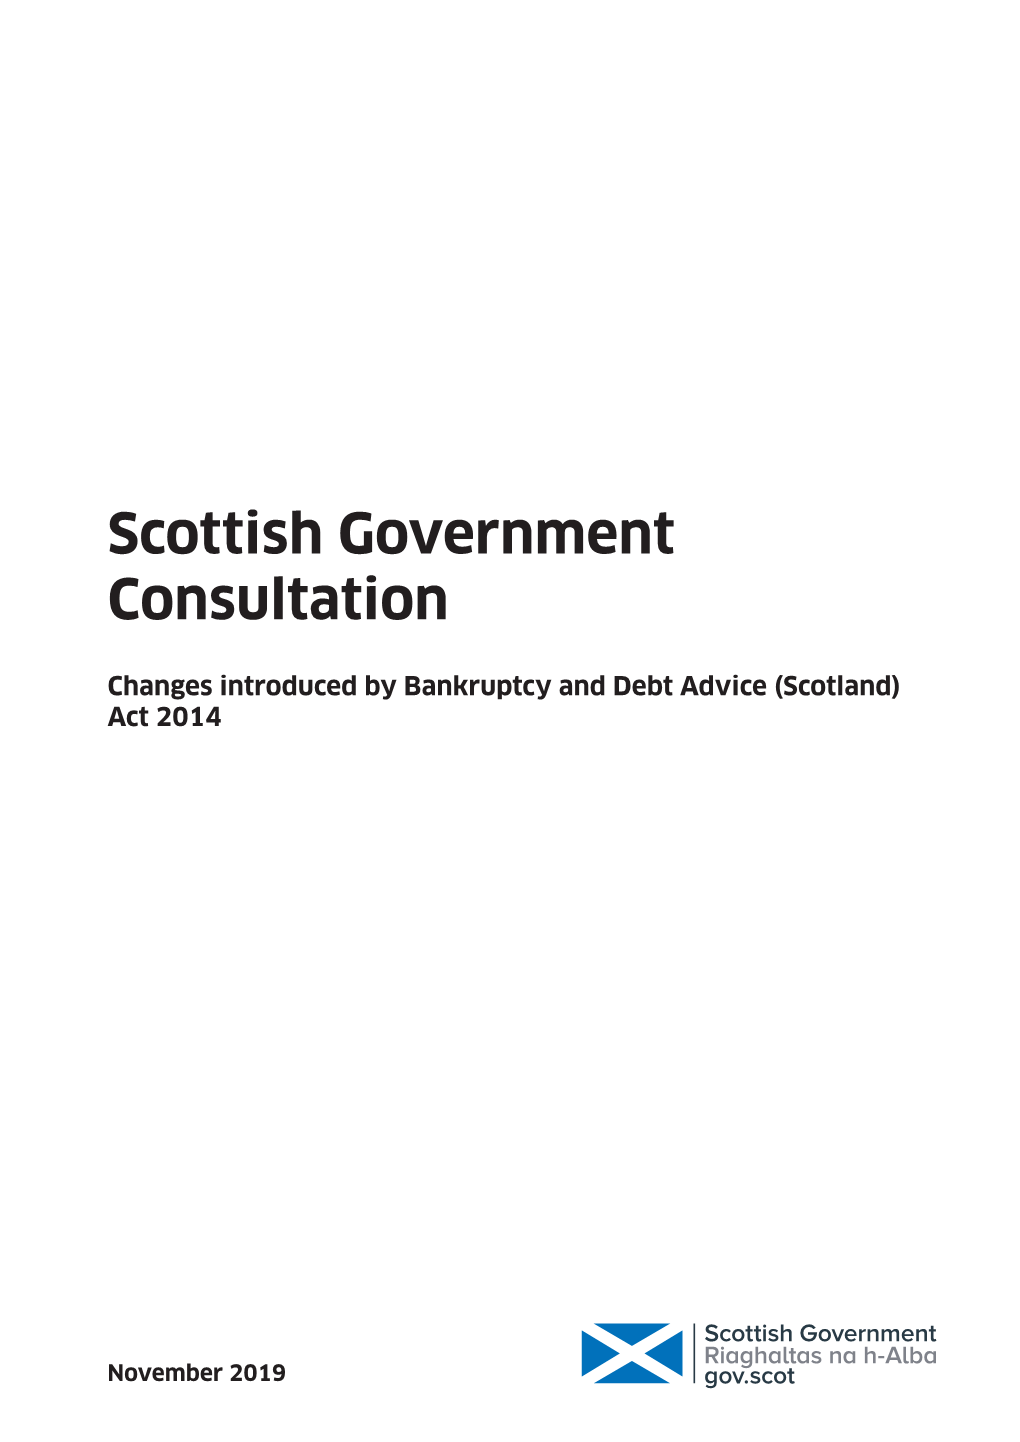 Scottish Government Consultation: Changes Introduced by Bankruptcy